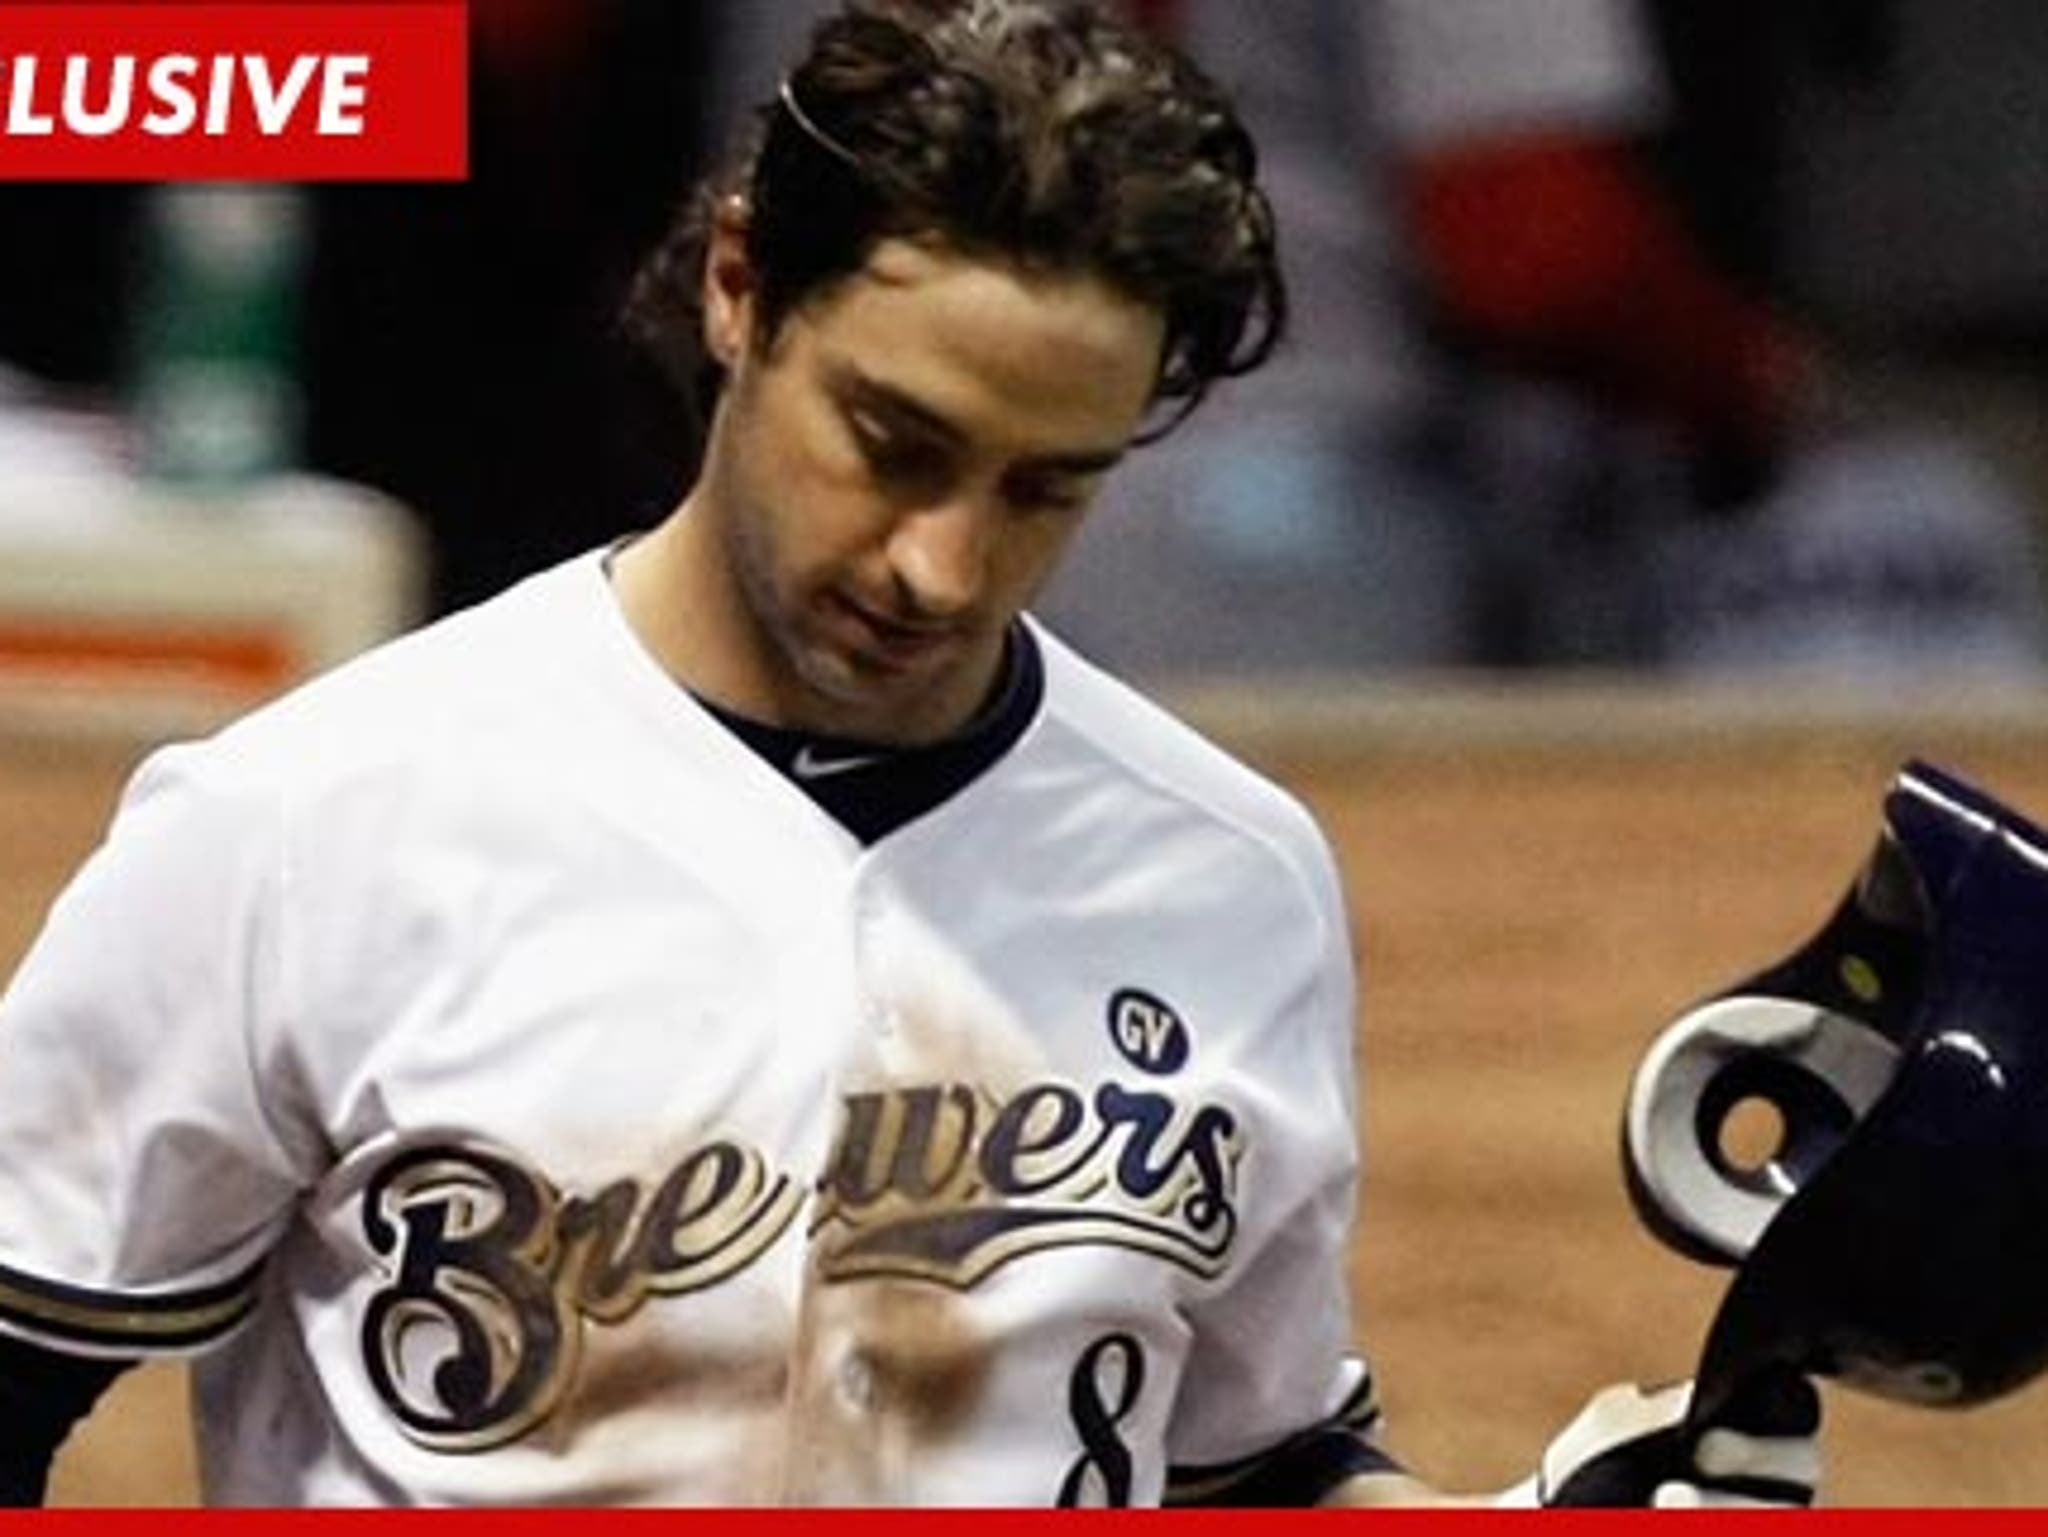 Ryan Braun diagnosed with strained oblique - NBC Sports